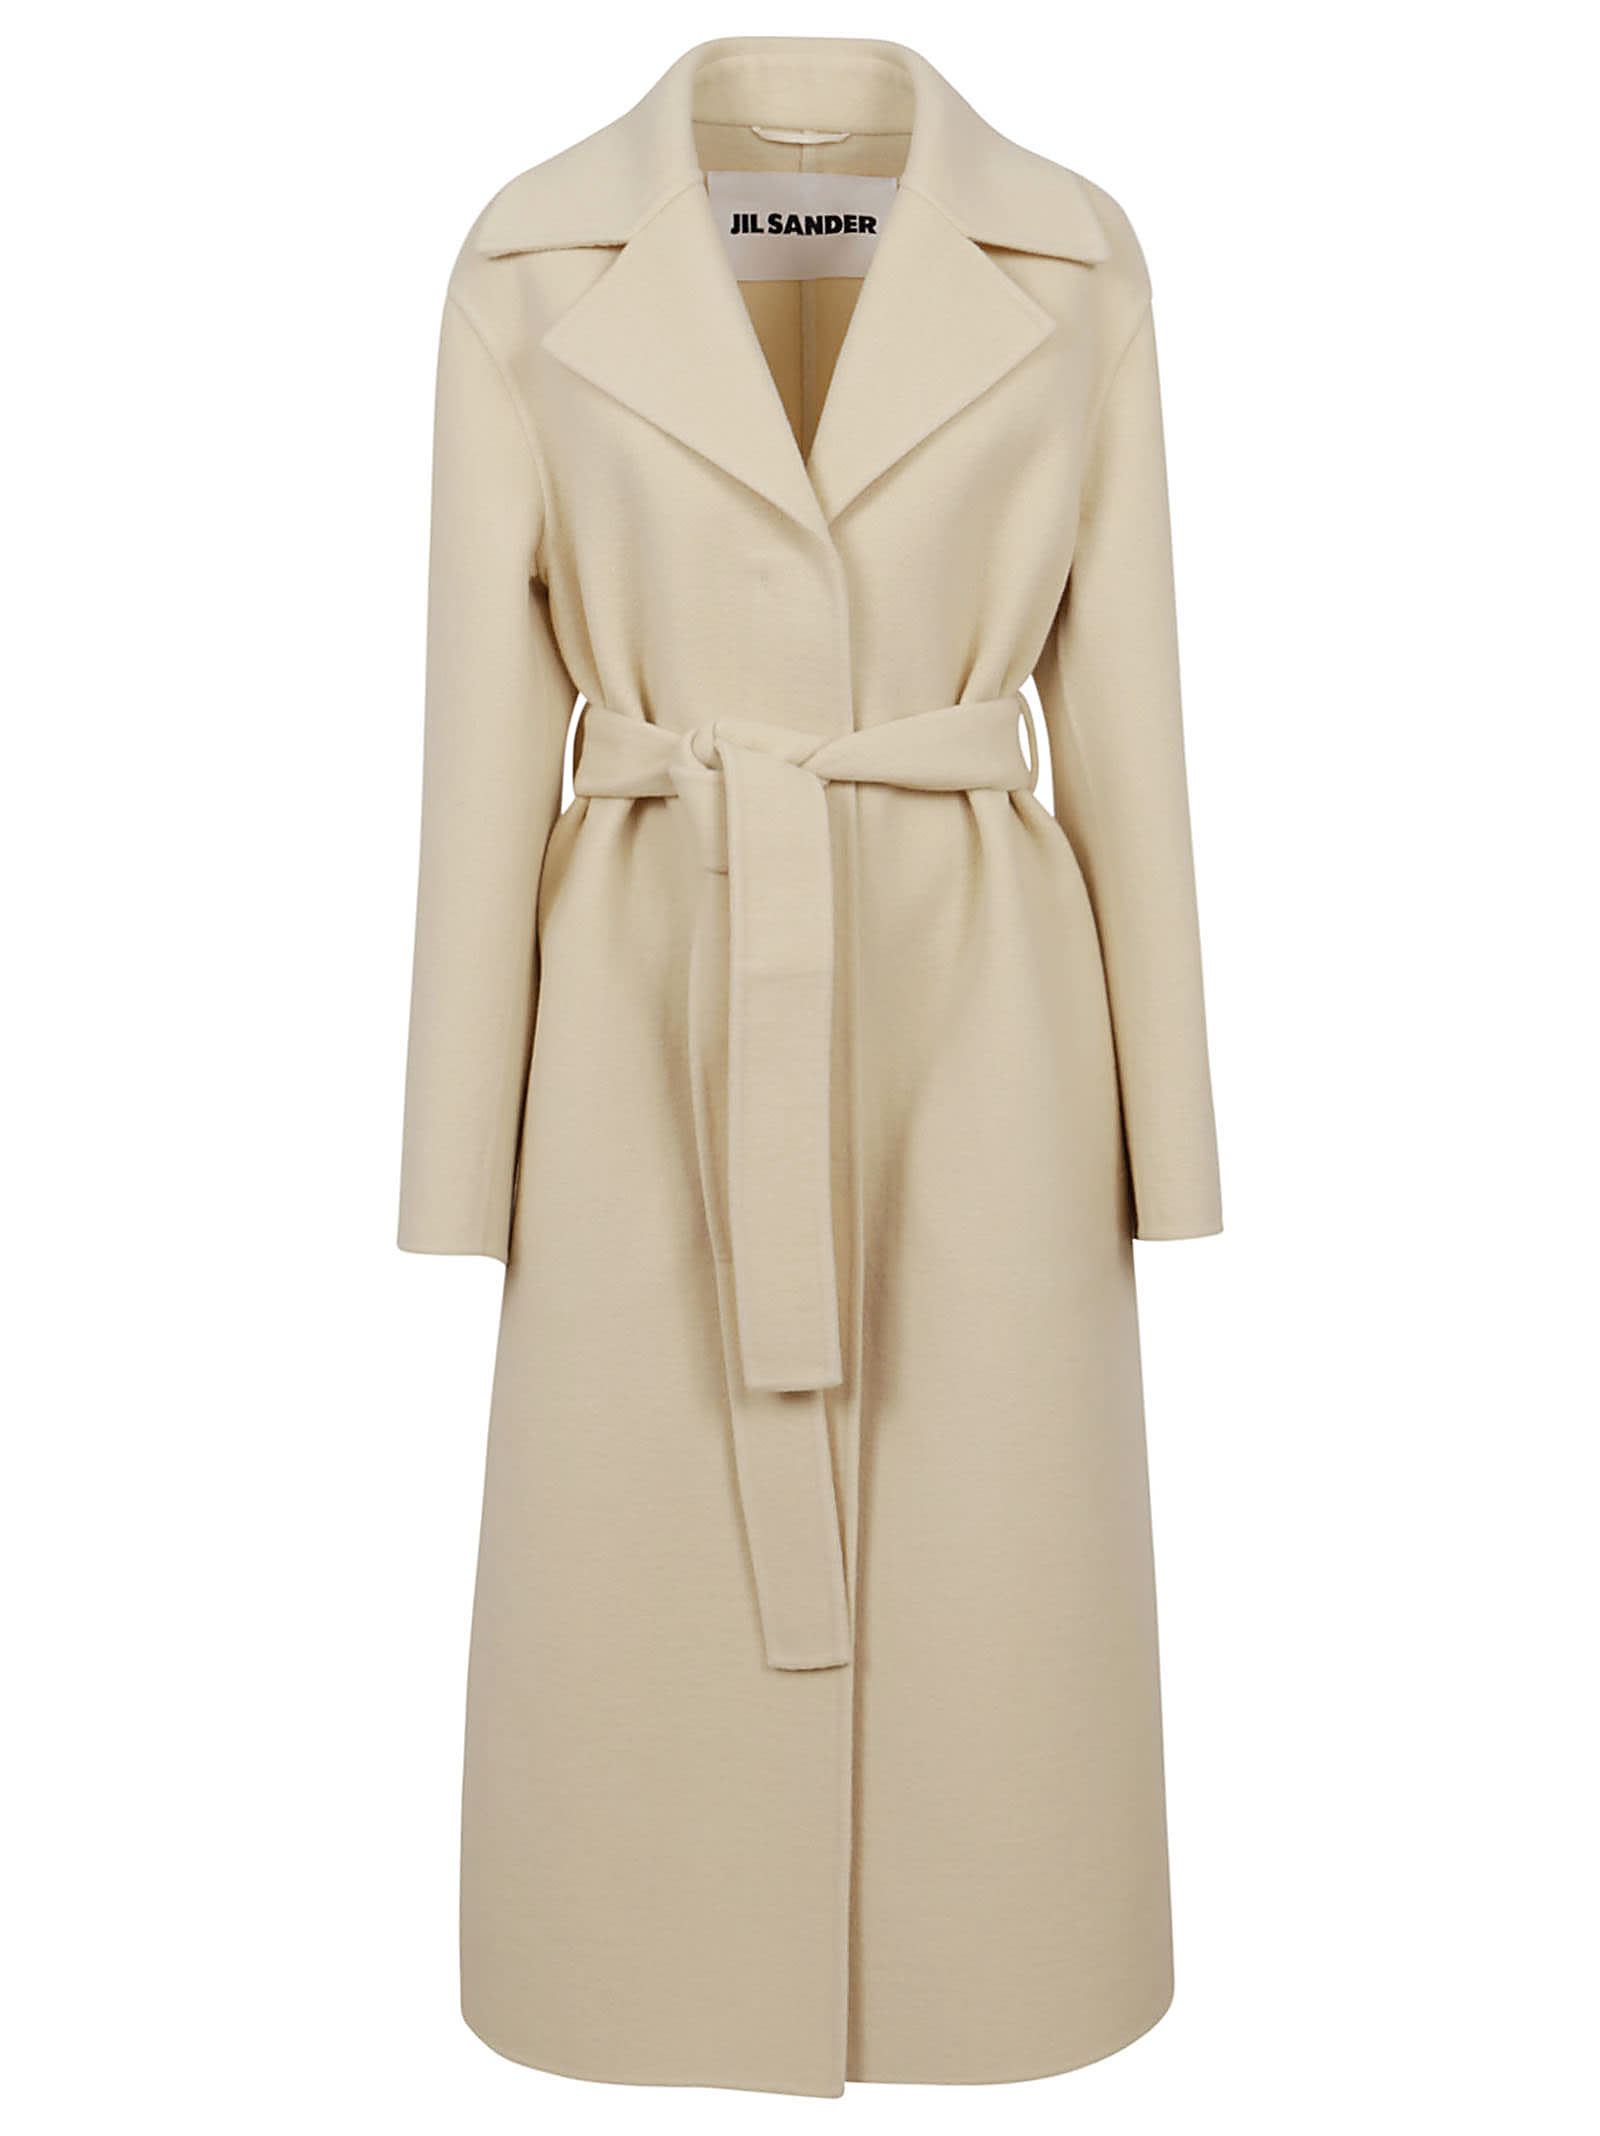 Jil Sander Coat P 01 Db - Double Splittable Washed And Felted